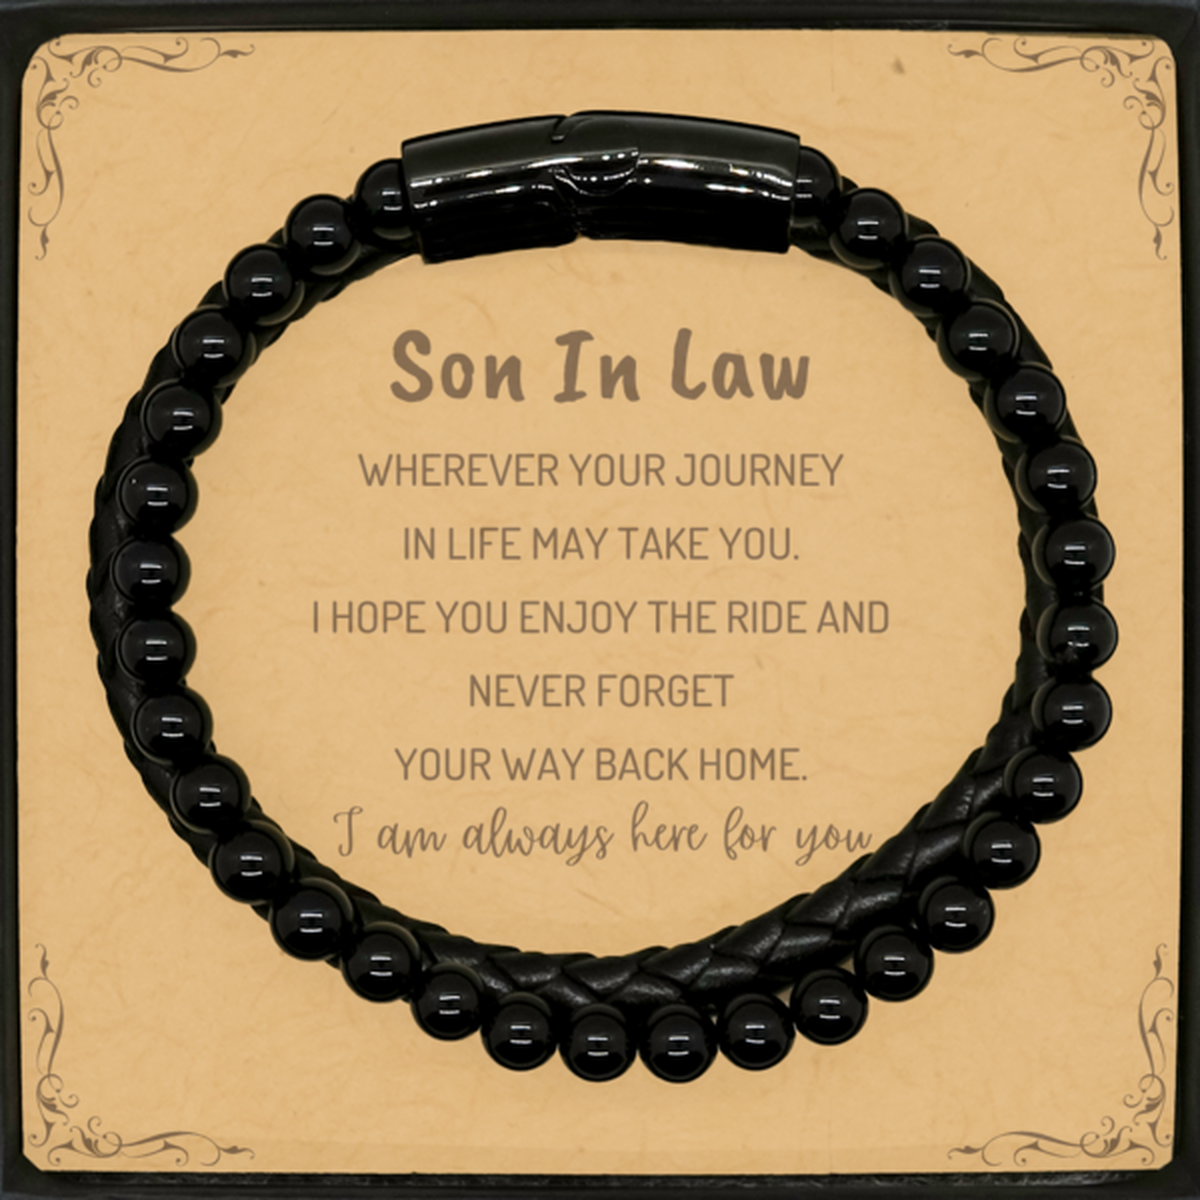 Son In Law wherever your journey in life may take you, I am always here for you Son In Law Stone Leather Bracelets, Awesome Christmas Gifts For Son In Law Message Card, Son In Law Birthday Gifts for Men Women Family Loved One